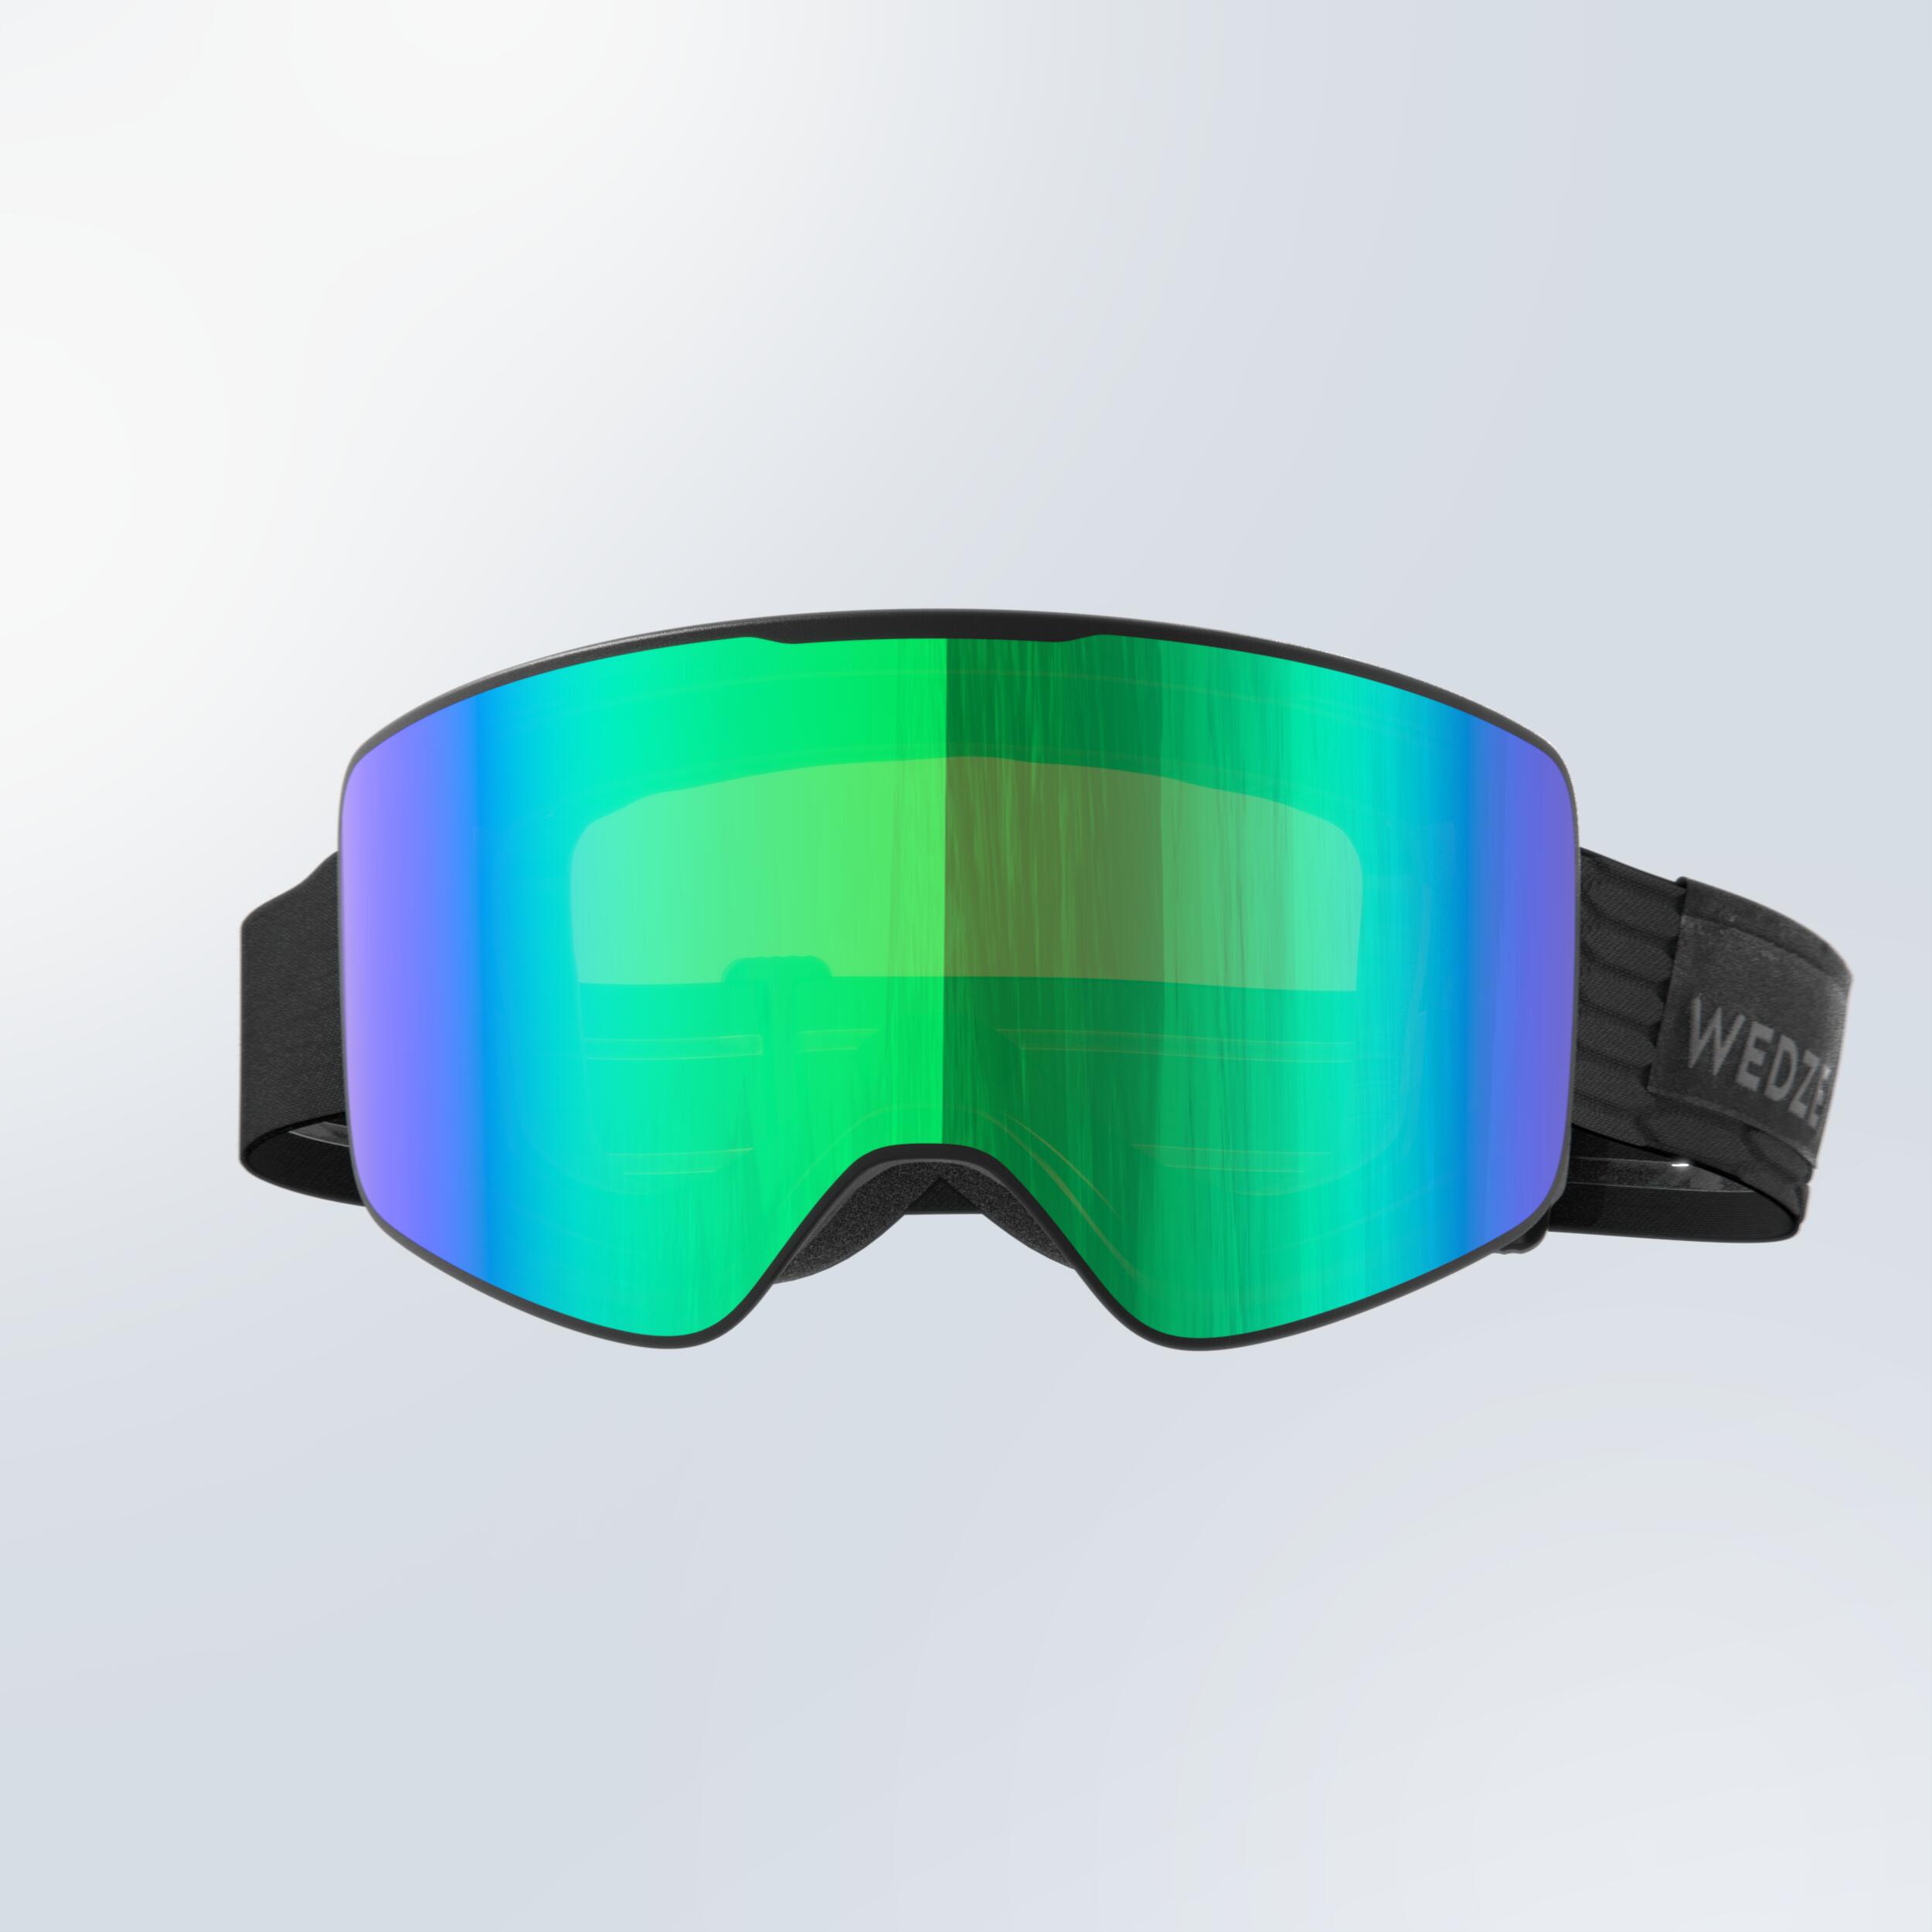 KIDS AND ADULT SKIING AND SNOWBOARDING GOGGLES BAD WEATHER - G 500 C HD 3/5